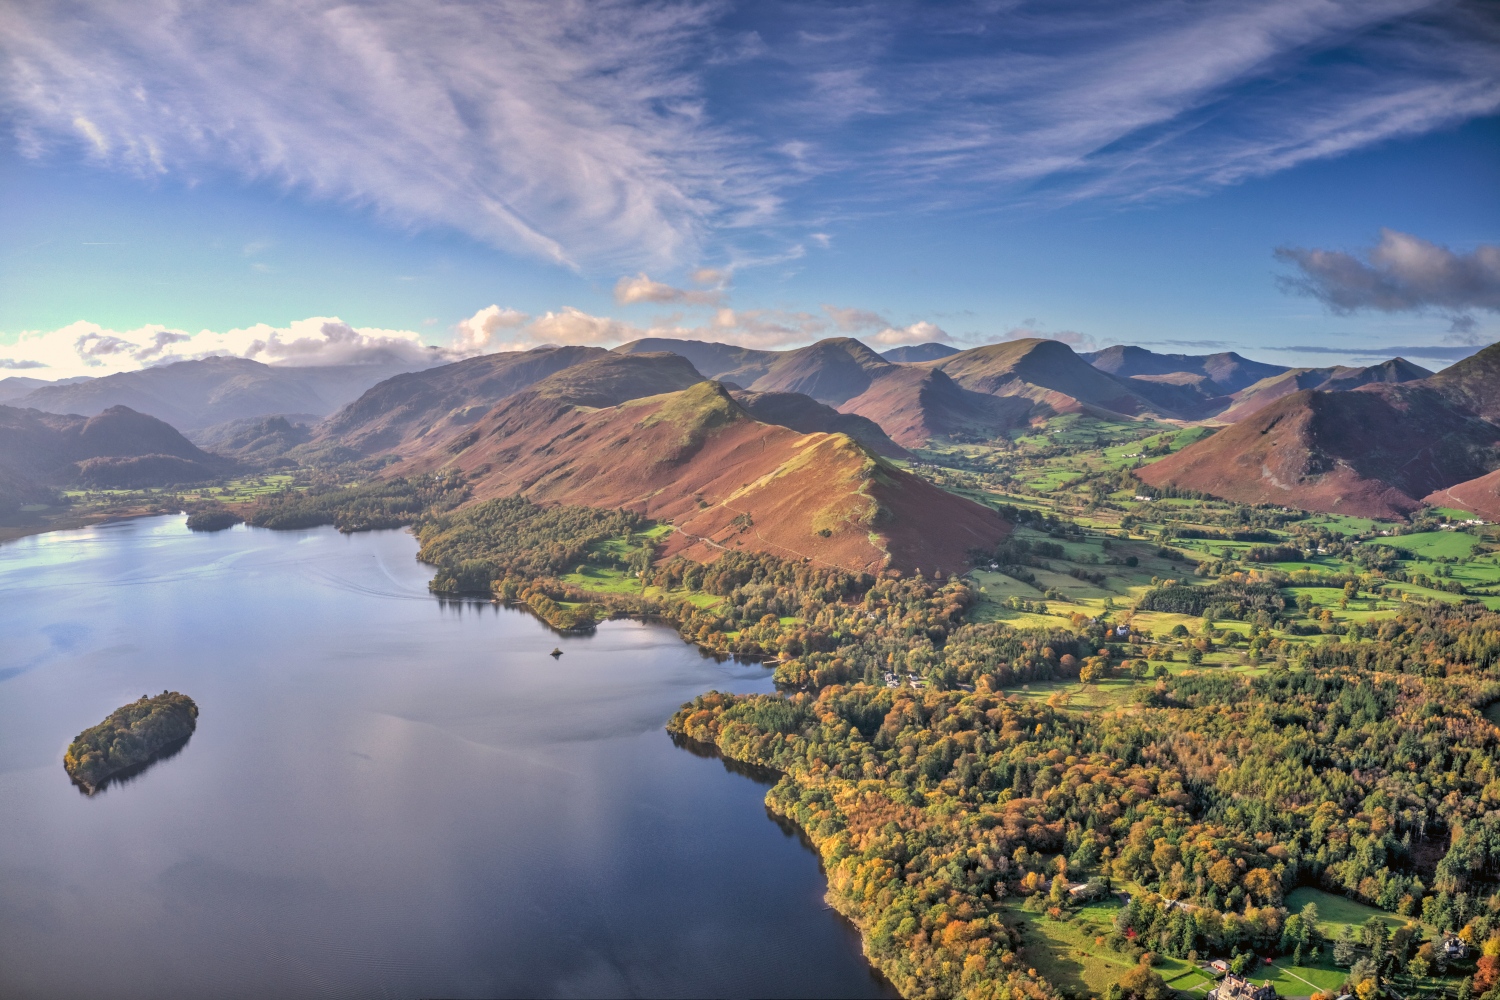 View over mountains, lakes and forest in the UK